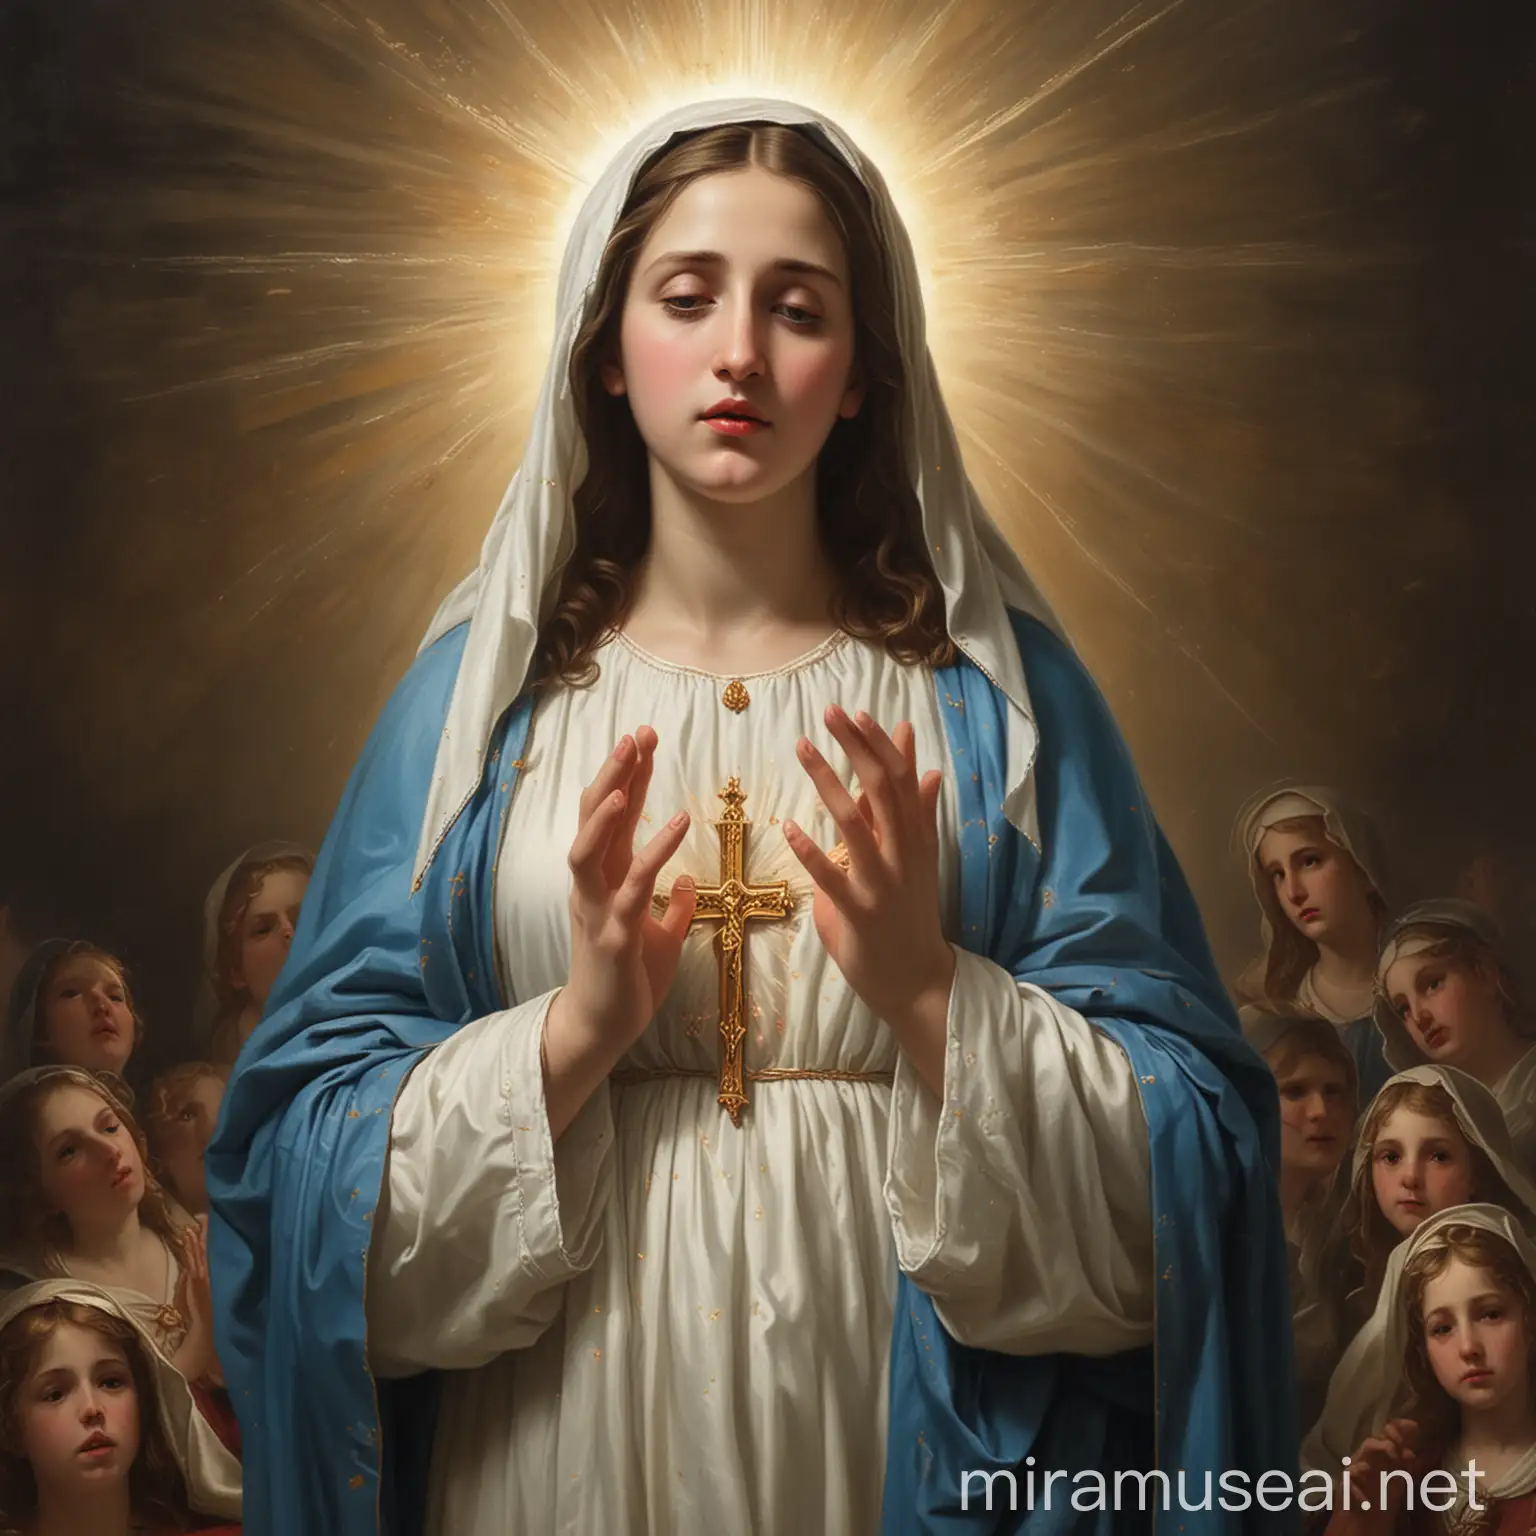 The painting depicts  the very young emotional virgin  Mary   The lighting is from the top left of the image behind the figure.  The fone view